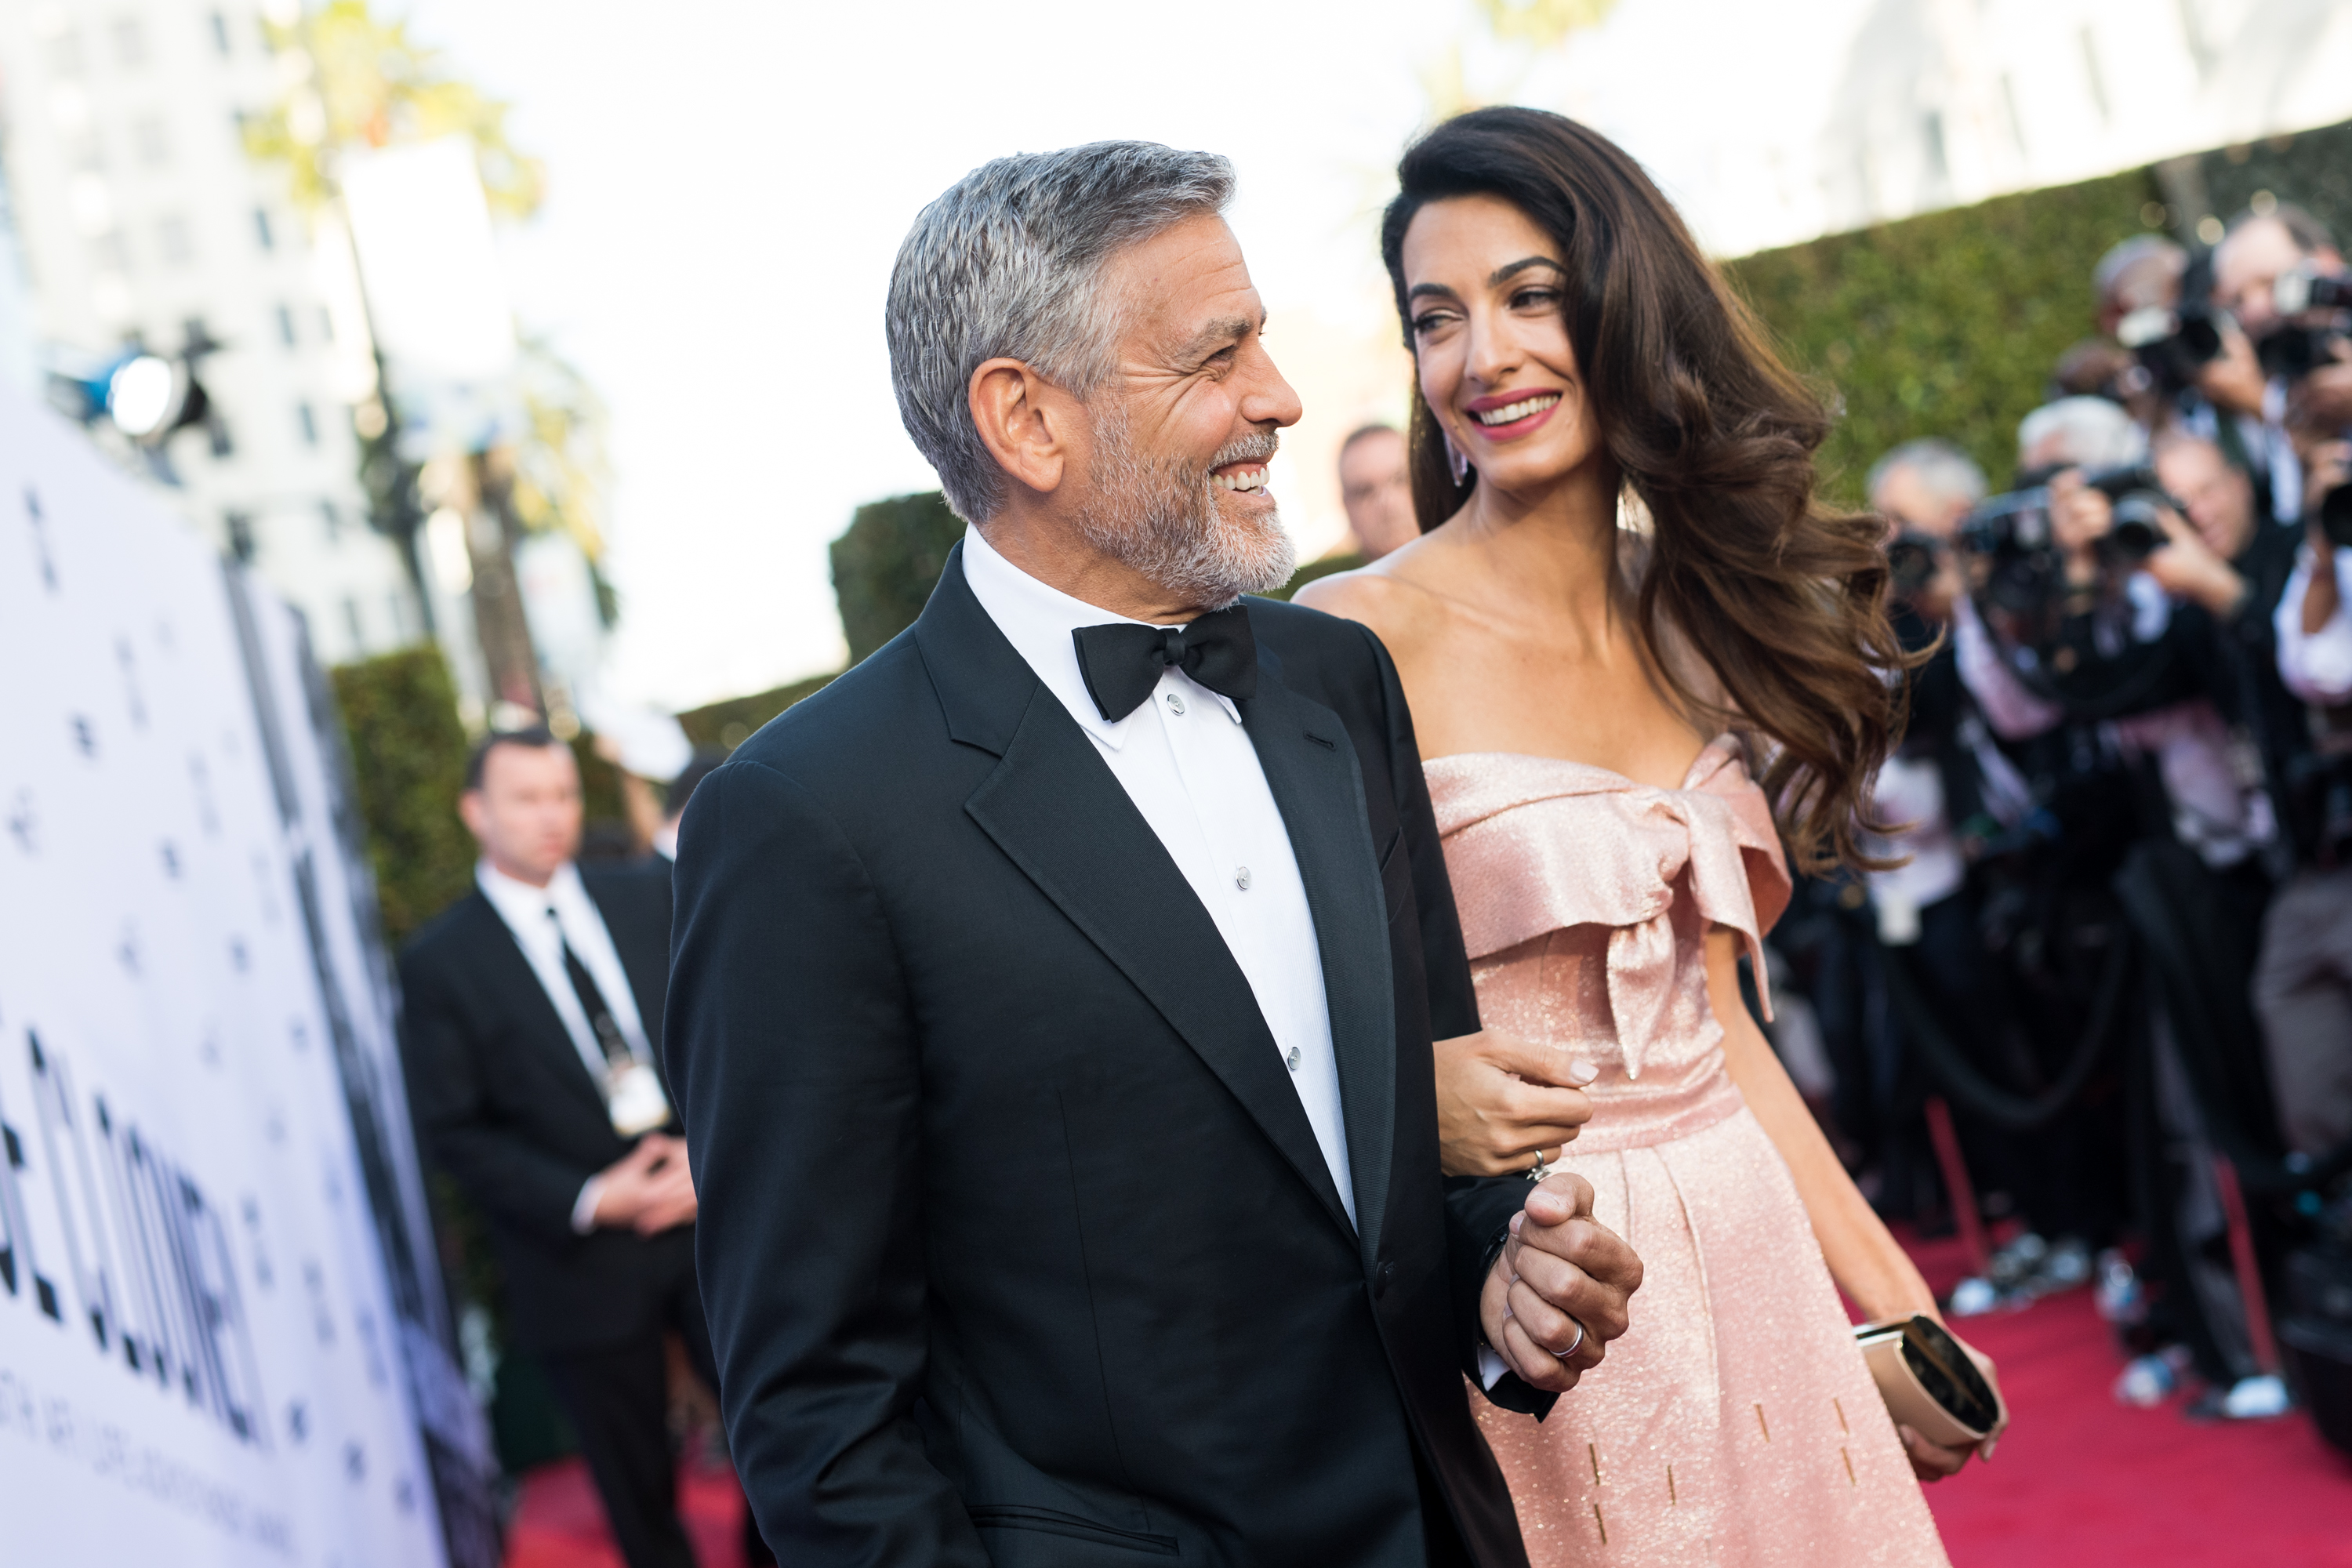 Amal Clooney and George Clooney attend the American Film Institute's 46th Life Achievement Award Gala Tribute to George Clooney at Dolby Theatre on June 7, 2018 in Hollywood, California. (Emma McIntyre&mdash;Getty Images for Turner)